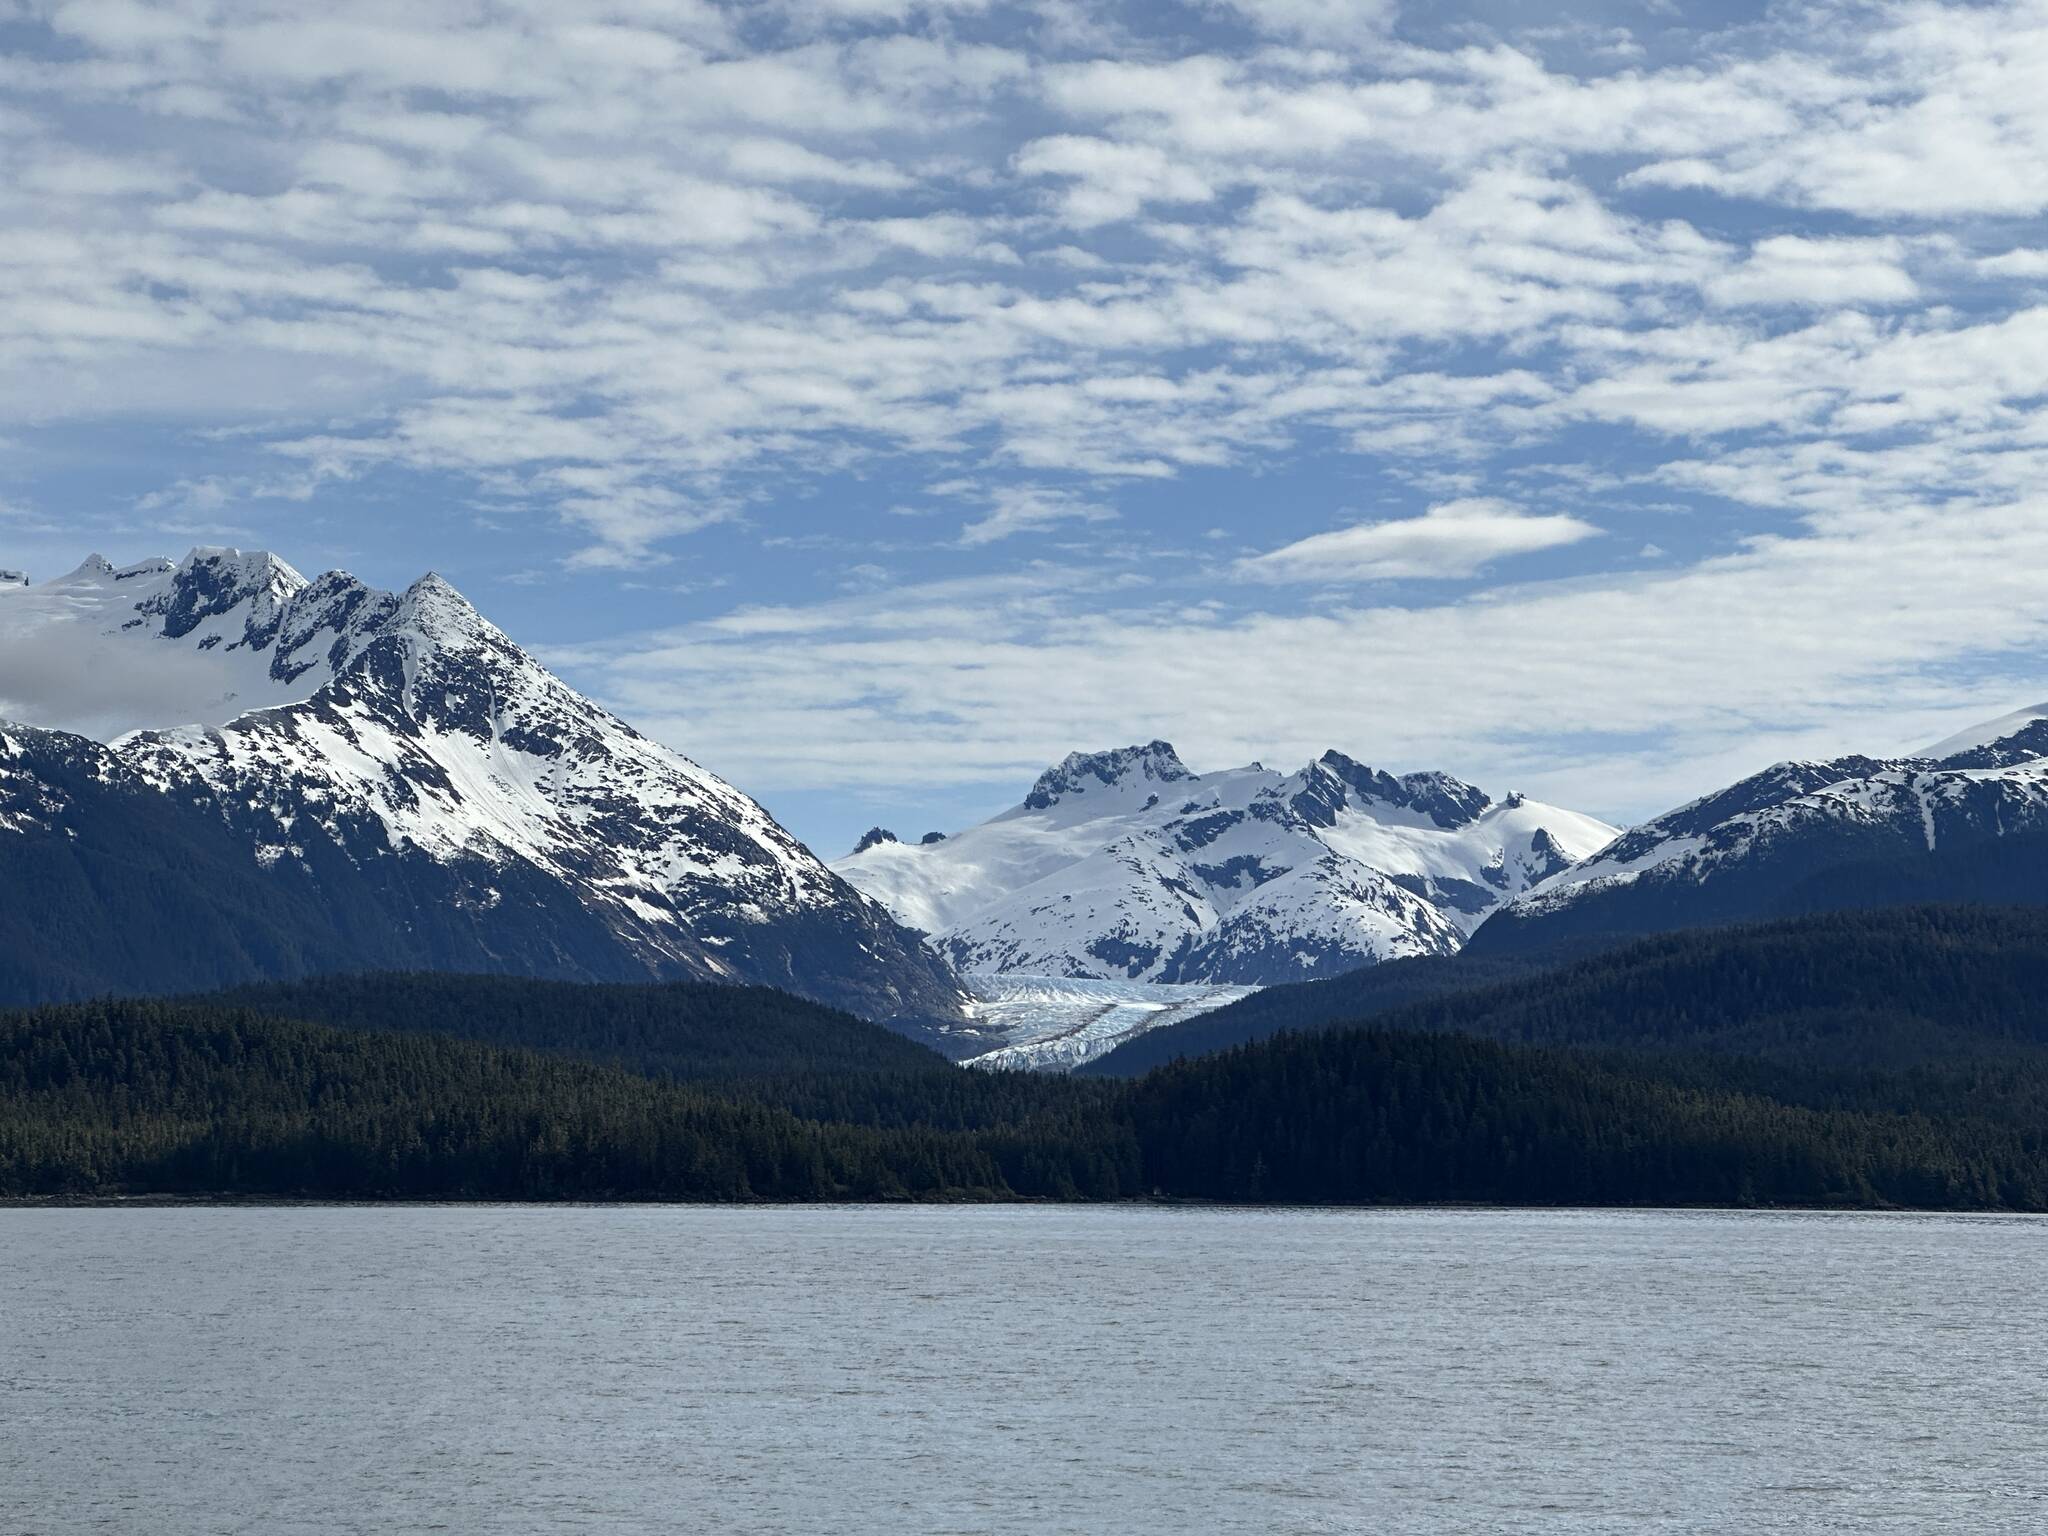 This photo shows Herbert Glacier as seen during a Berners Bay cruise. (Courtesy Photo / Deana Barajas)
This photo shows Herbert Glacier as seen during a Berners Bay cruise. (Courtesy Photo / Deana Barajas)